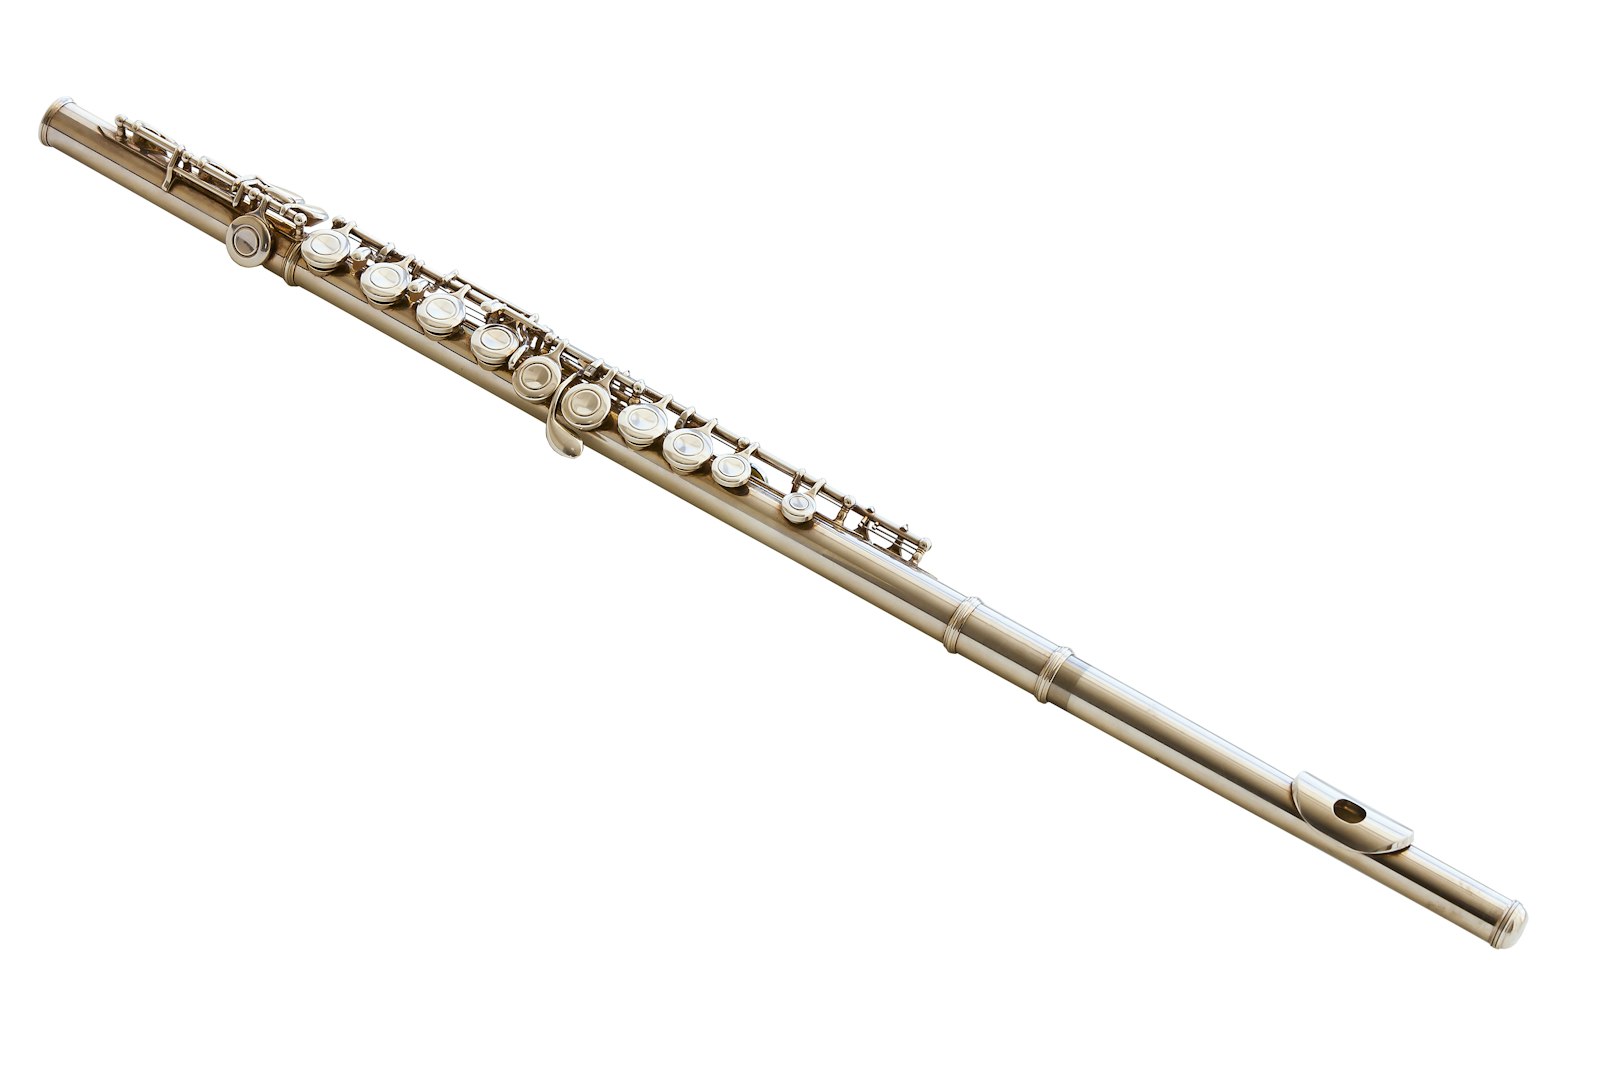 The Different Types of Flutes from Around the World